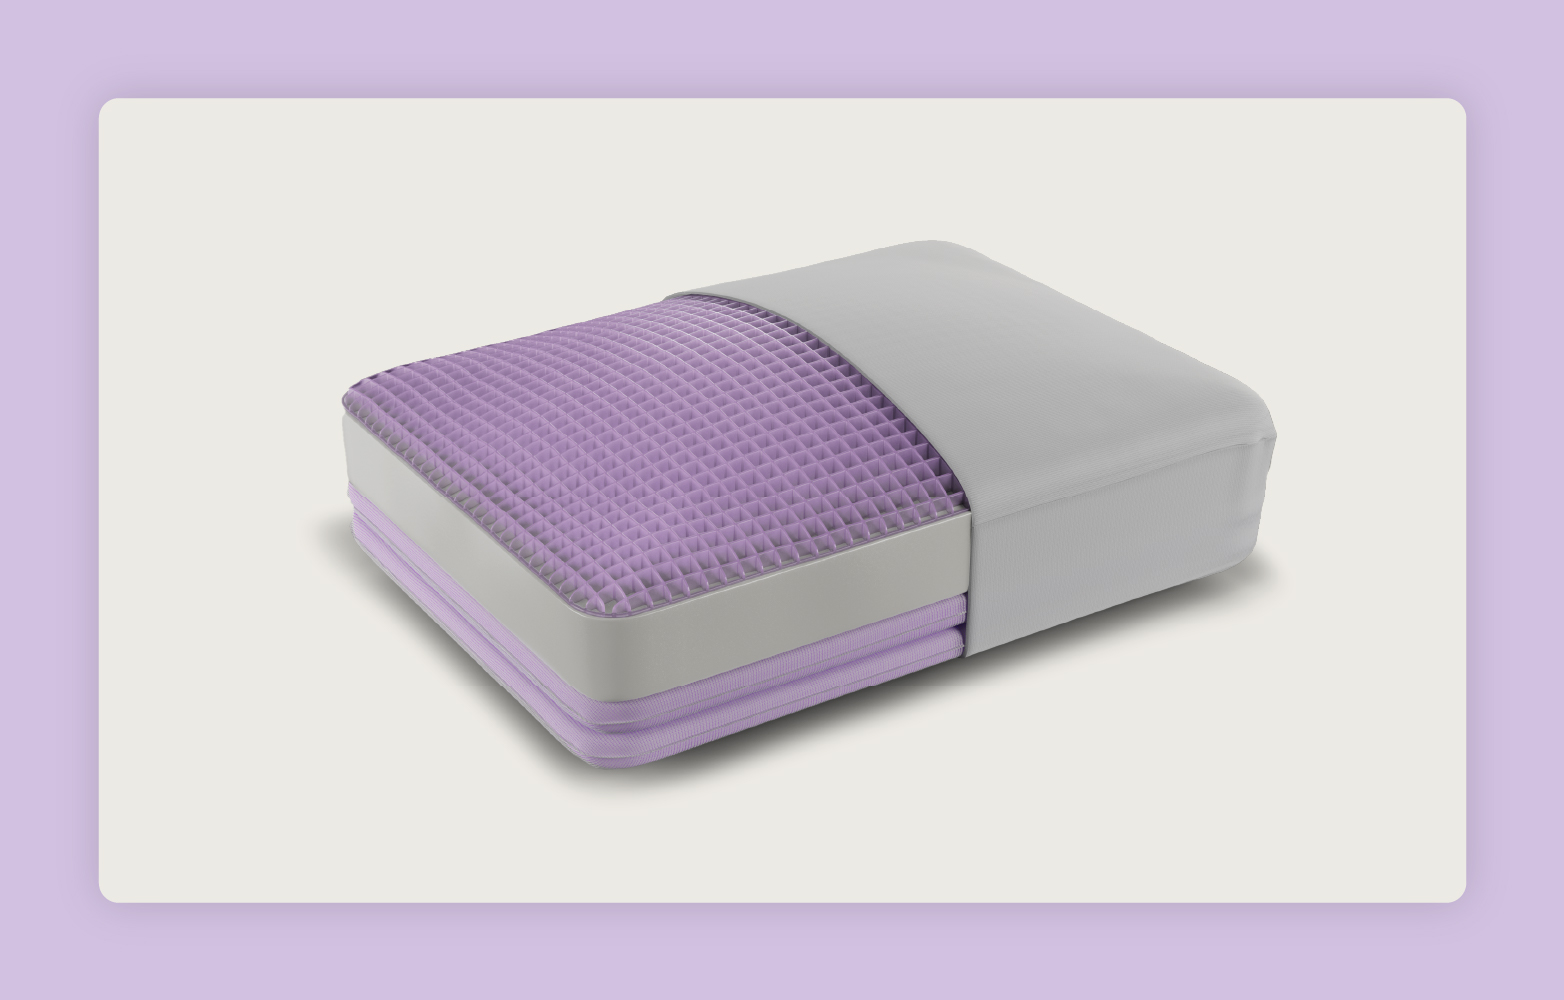 The Purple DreamLayer™ Pillow partially shows the GelFlex® Grid, MicroAir™ Foam, and booster inserts.